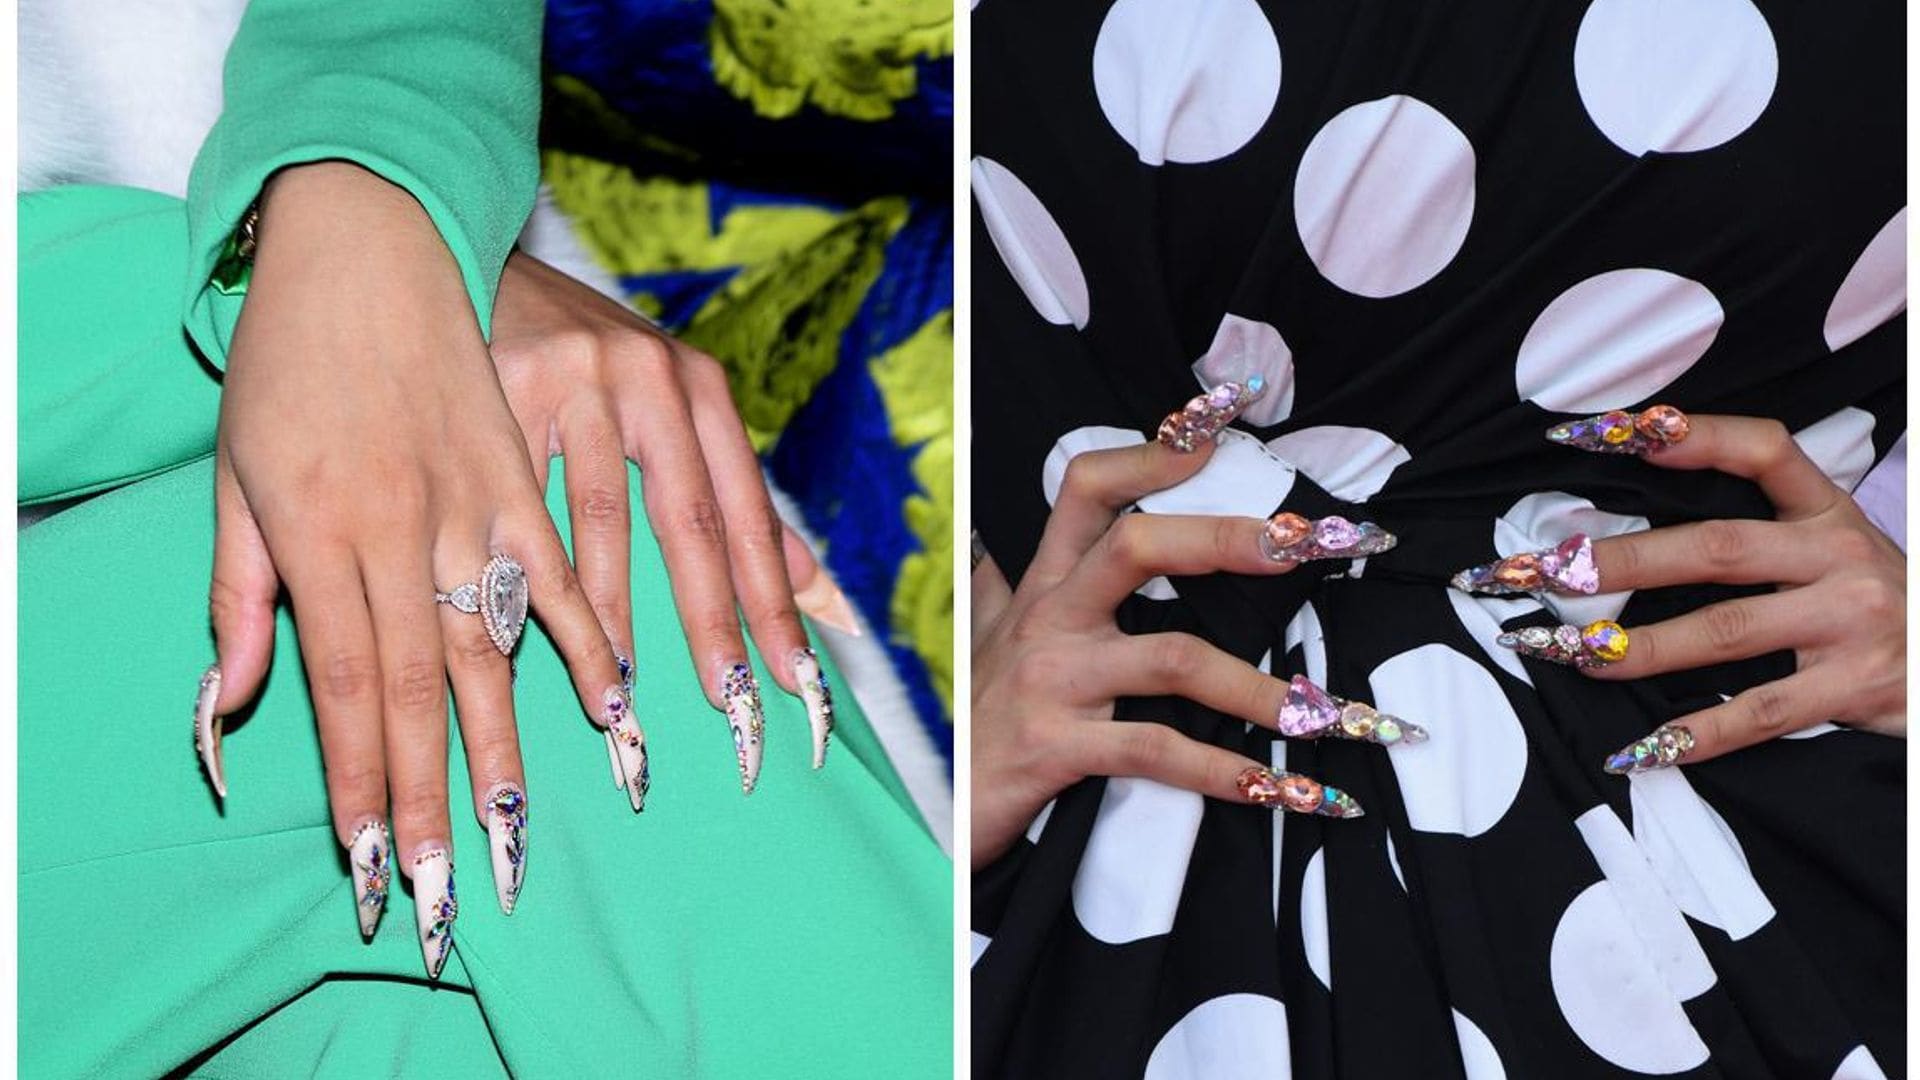 Five celebrity nail artists behind Cardi B, Kylie Jenner, Rosalia and Karol G most iconic and extravagant looks